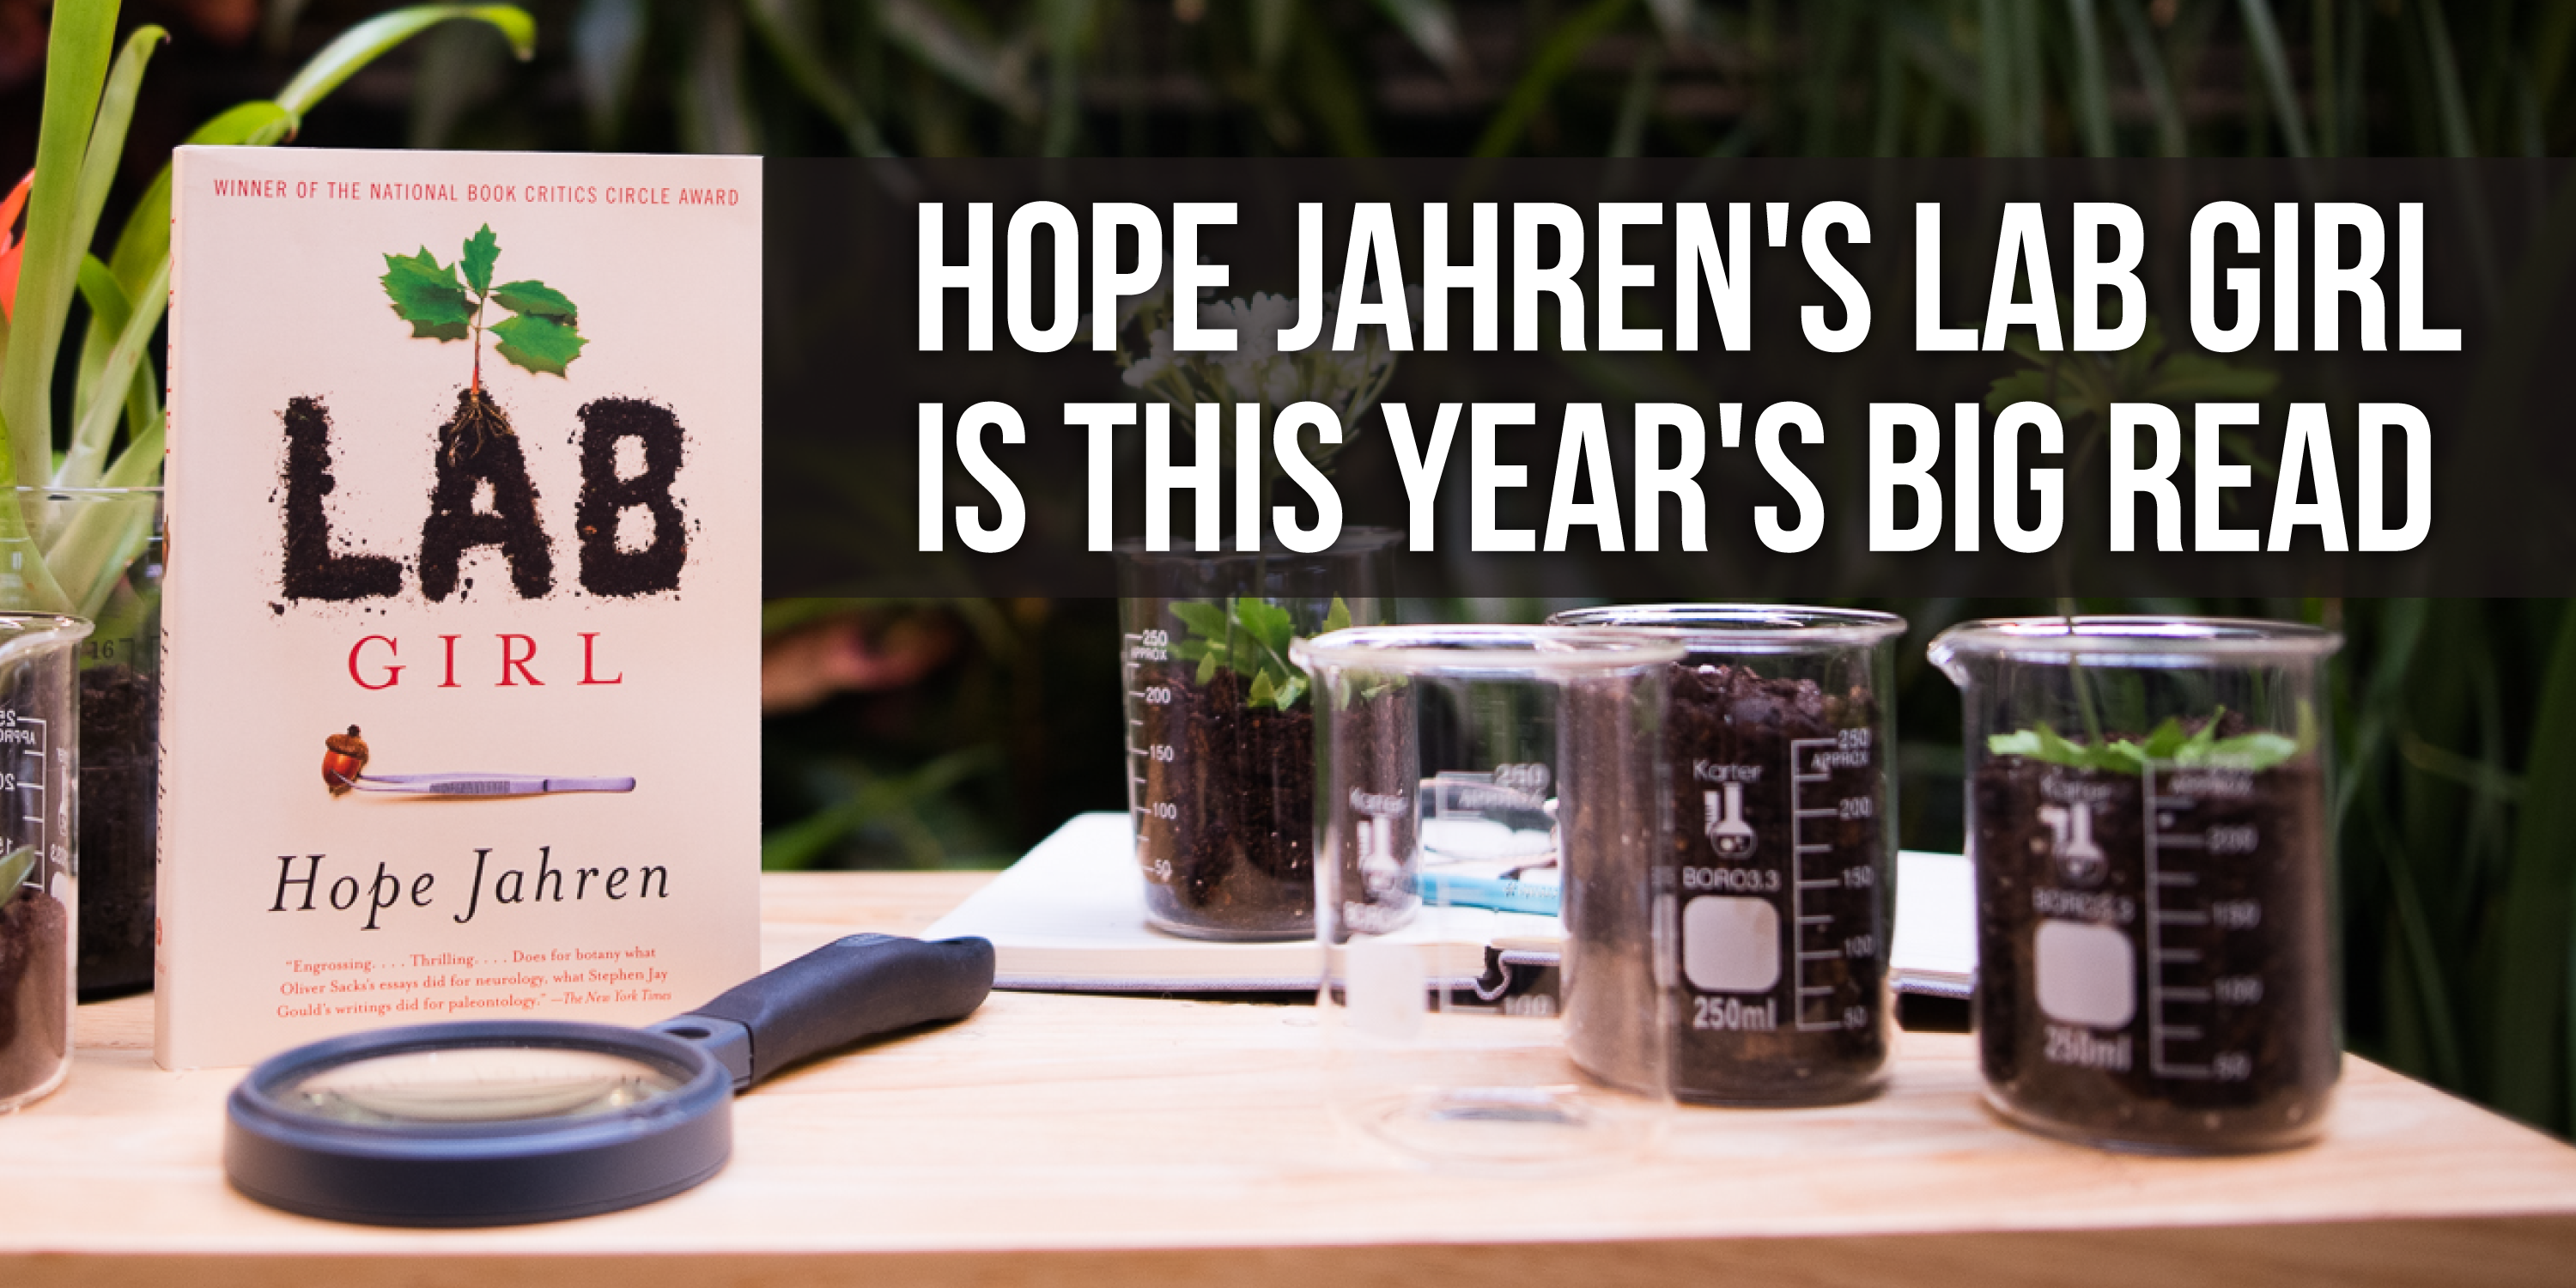 Hope Jahren's Lab Girl is This Year's Big Read